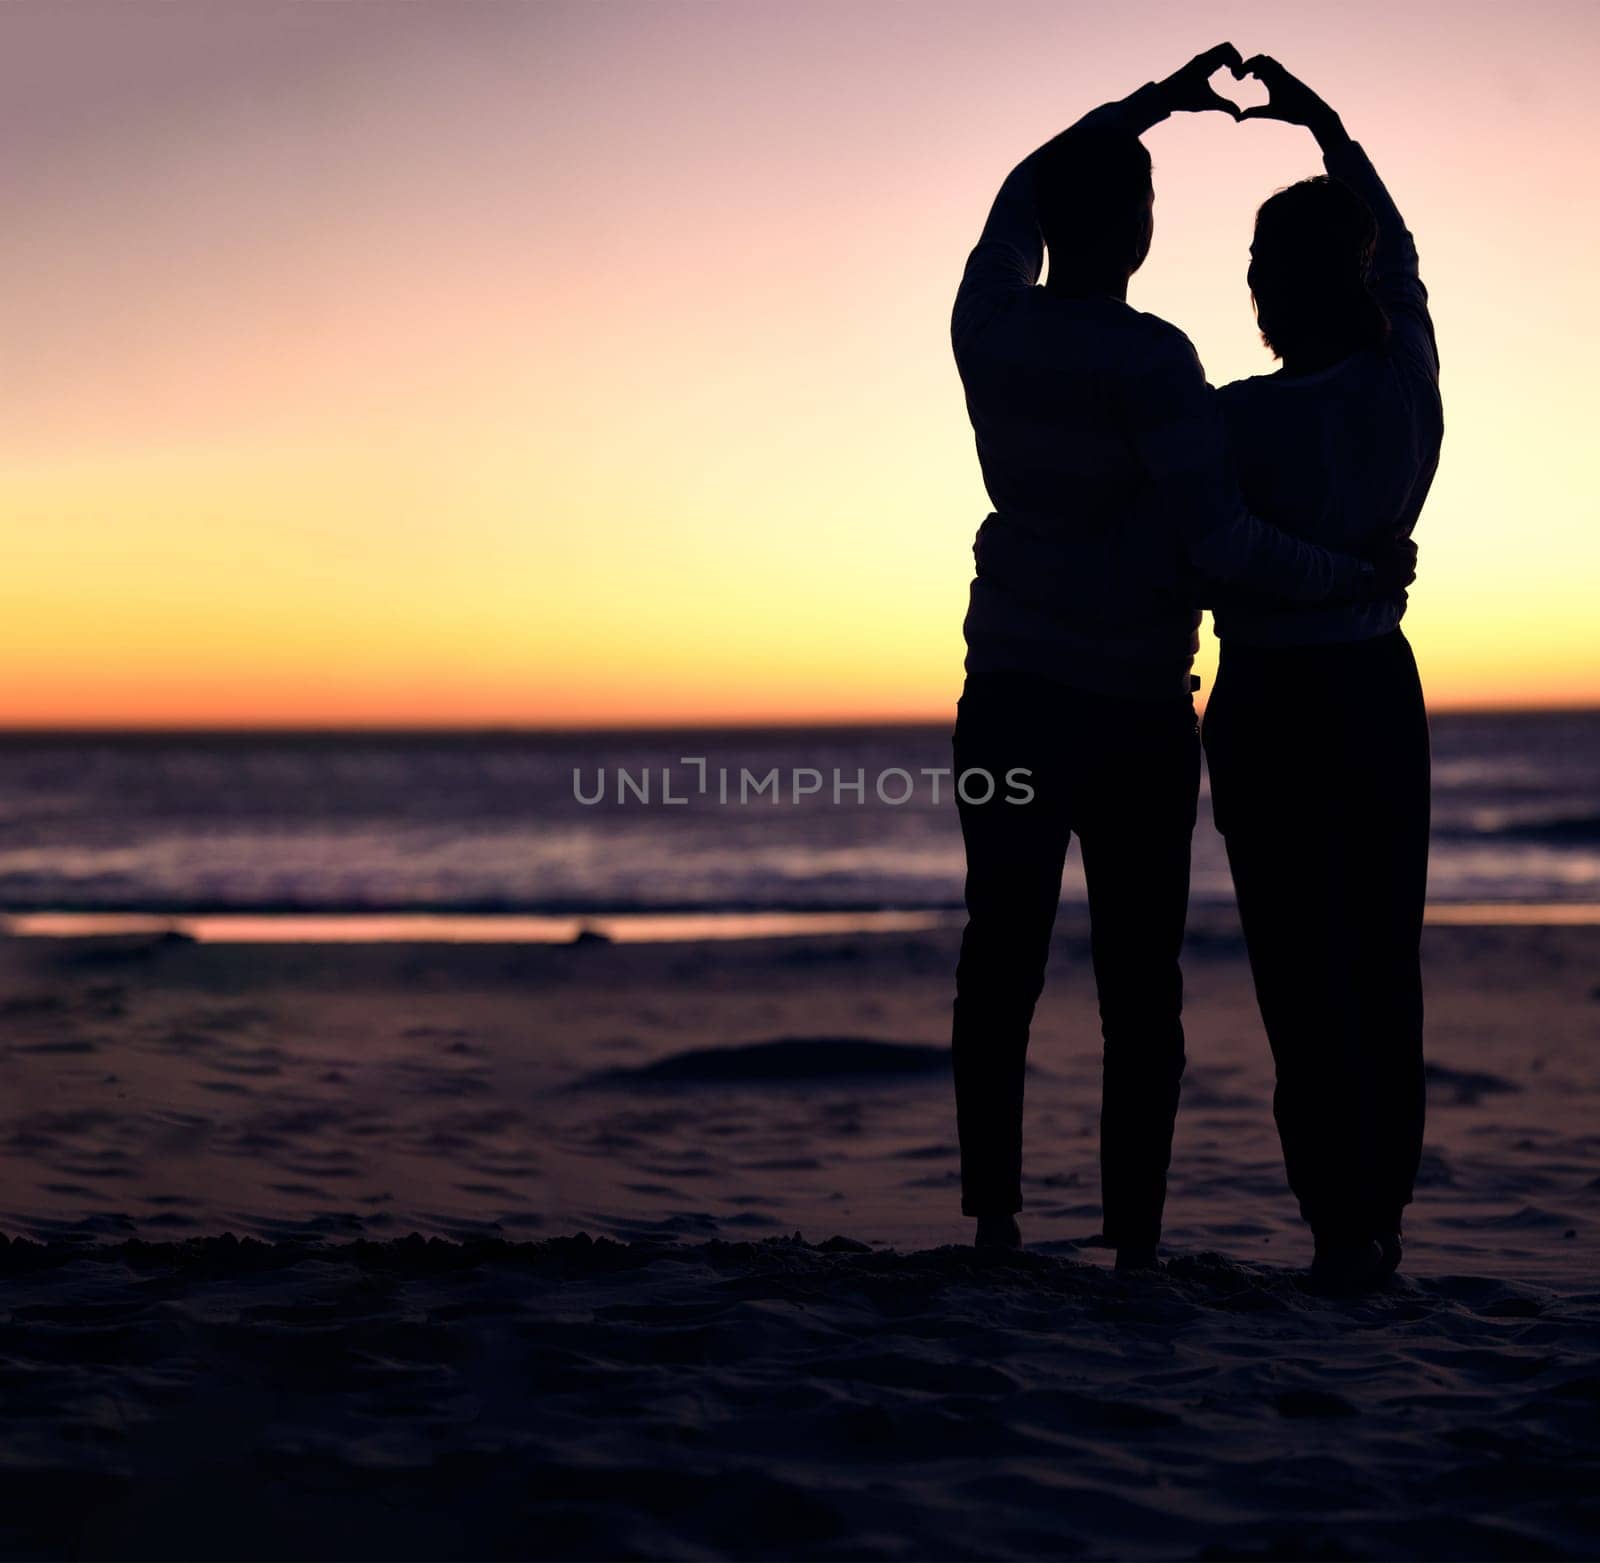 Couple, sunset silhouette and beach with heart sign hands, bonding and love on vacation for honeymoon. Man, woman and romantic hand signal by ocean with dusk sunshine for romance together in nature.